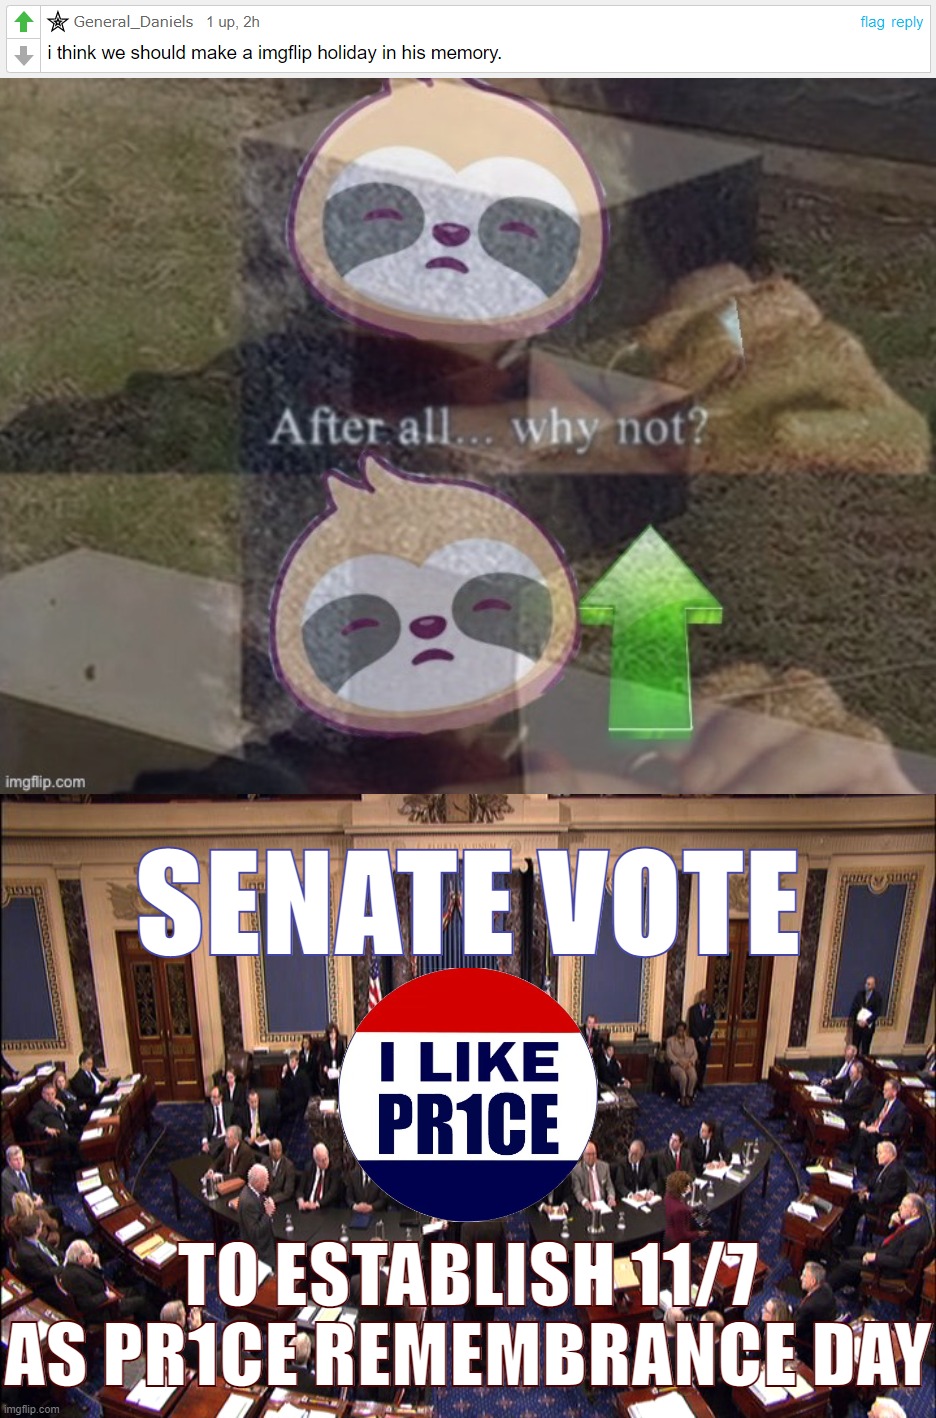 Per General_Daniels' suggestion, -senator_sloth- proposes S.B. 117 to establish 11/7 in perpetuity as PR1CE REMEMBRANCE DAY. | SENATE VOTE; TO ESTABLISH 11/7 AS PR1CE REMEMBRANCE DAY | image tagged in general_daniels imgflip holiday,sloth after all why not upvote f gravestone,senate floor,i,like,pr1ce | made w/ Imgflip meme maker